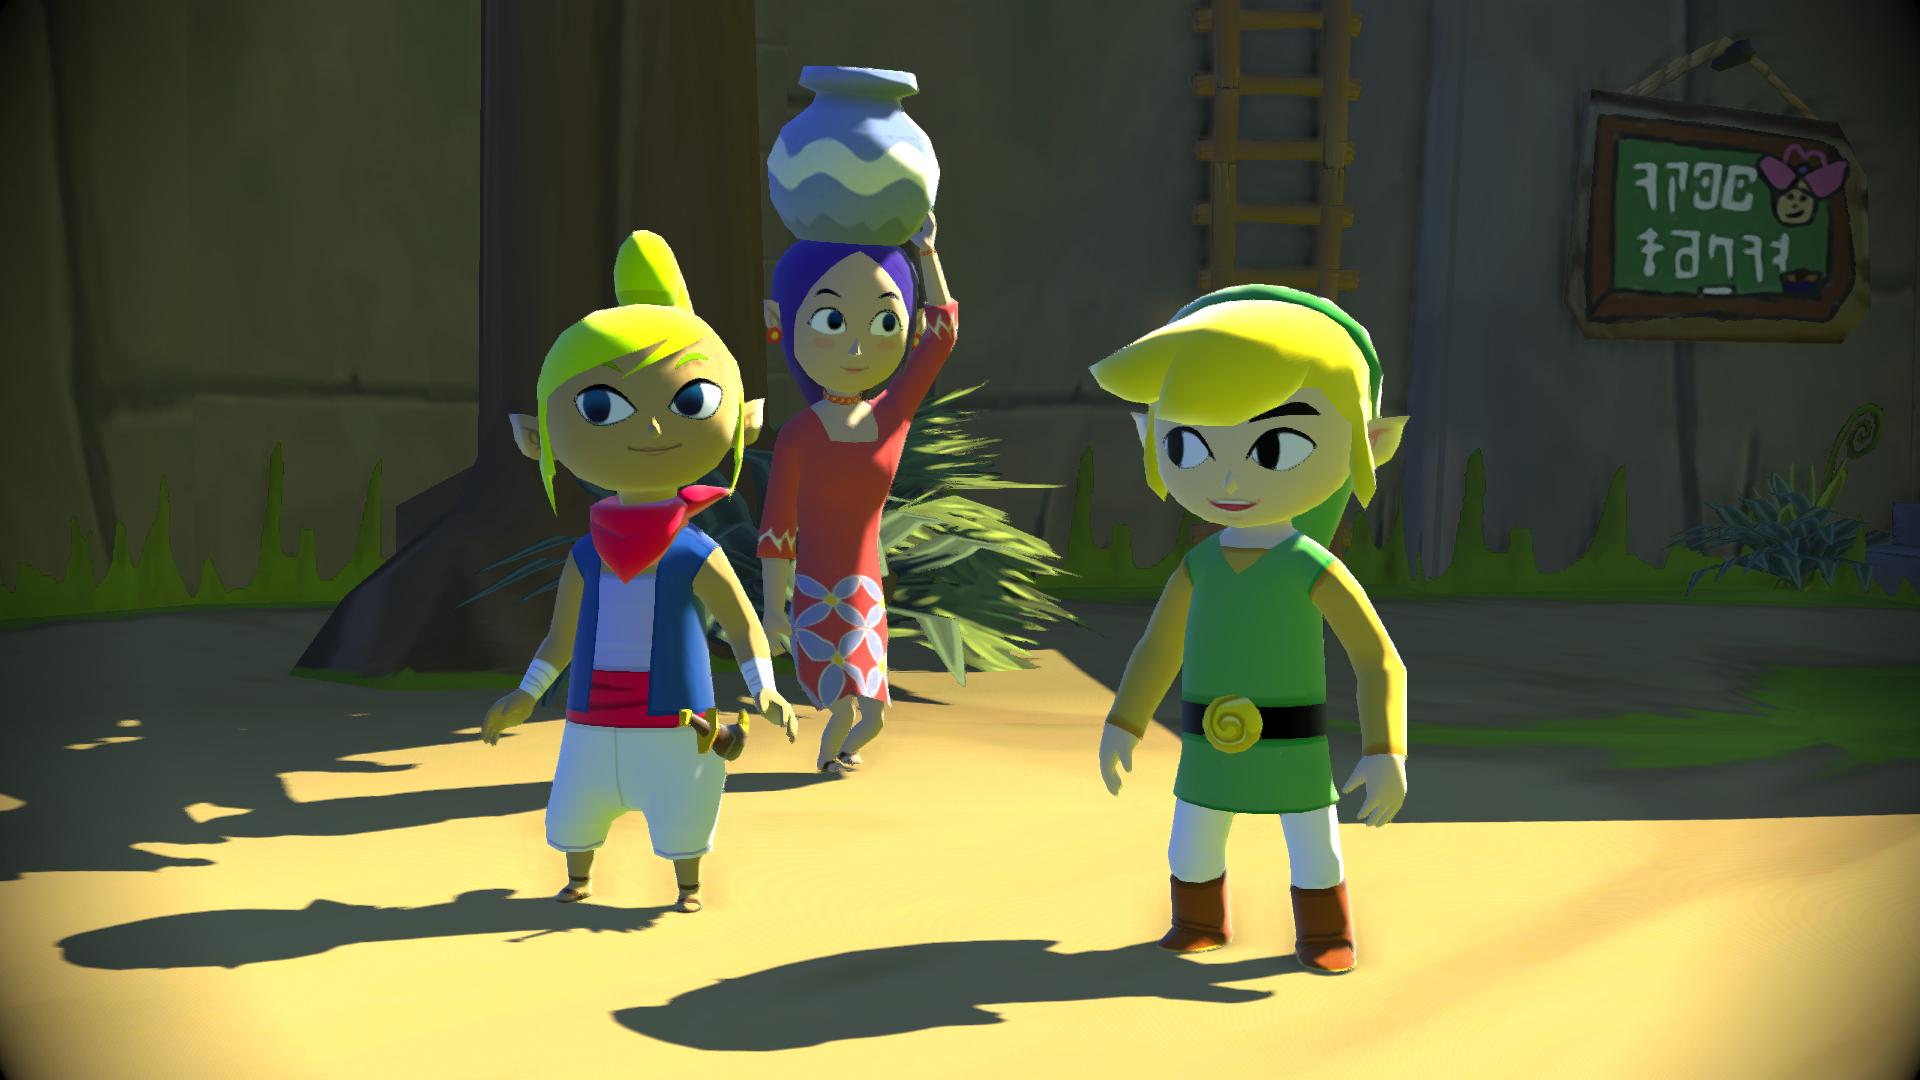 Nintendo says no to Ocarina of Time and Wind Waker remakes